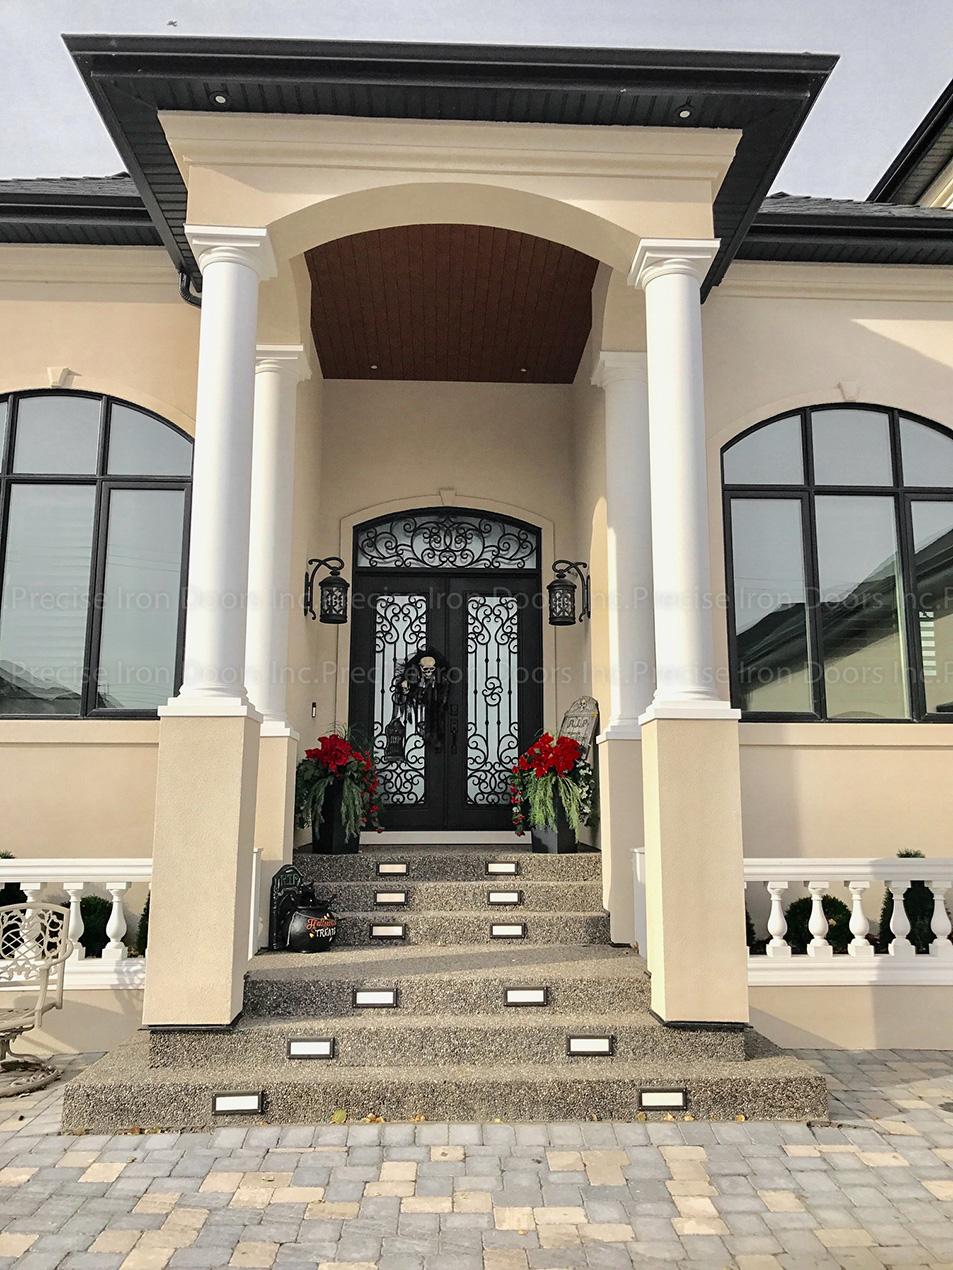 Ornate wrought iron double entry doors